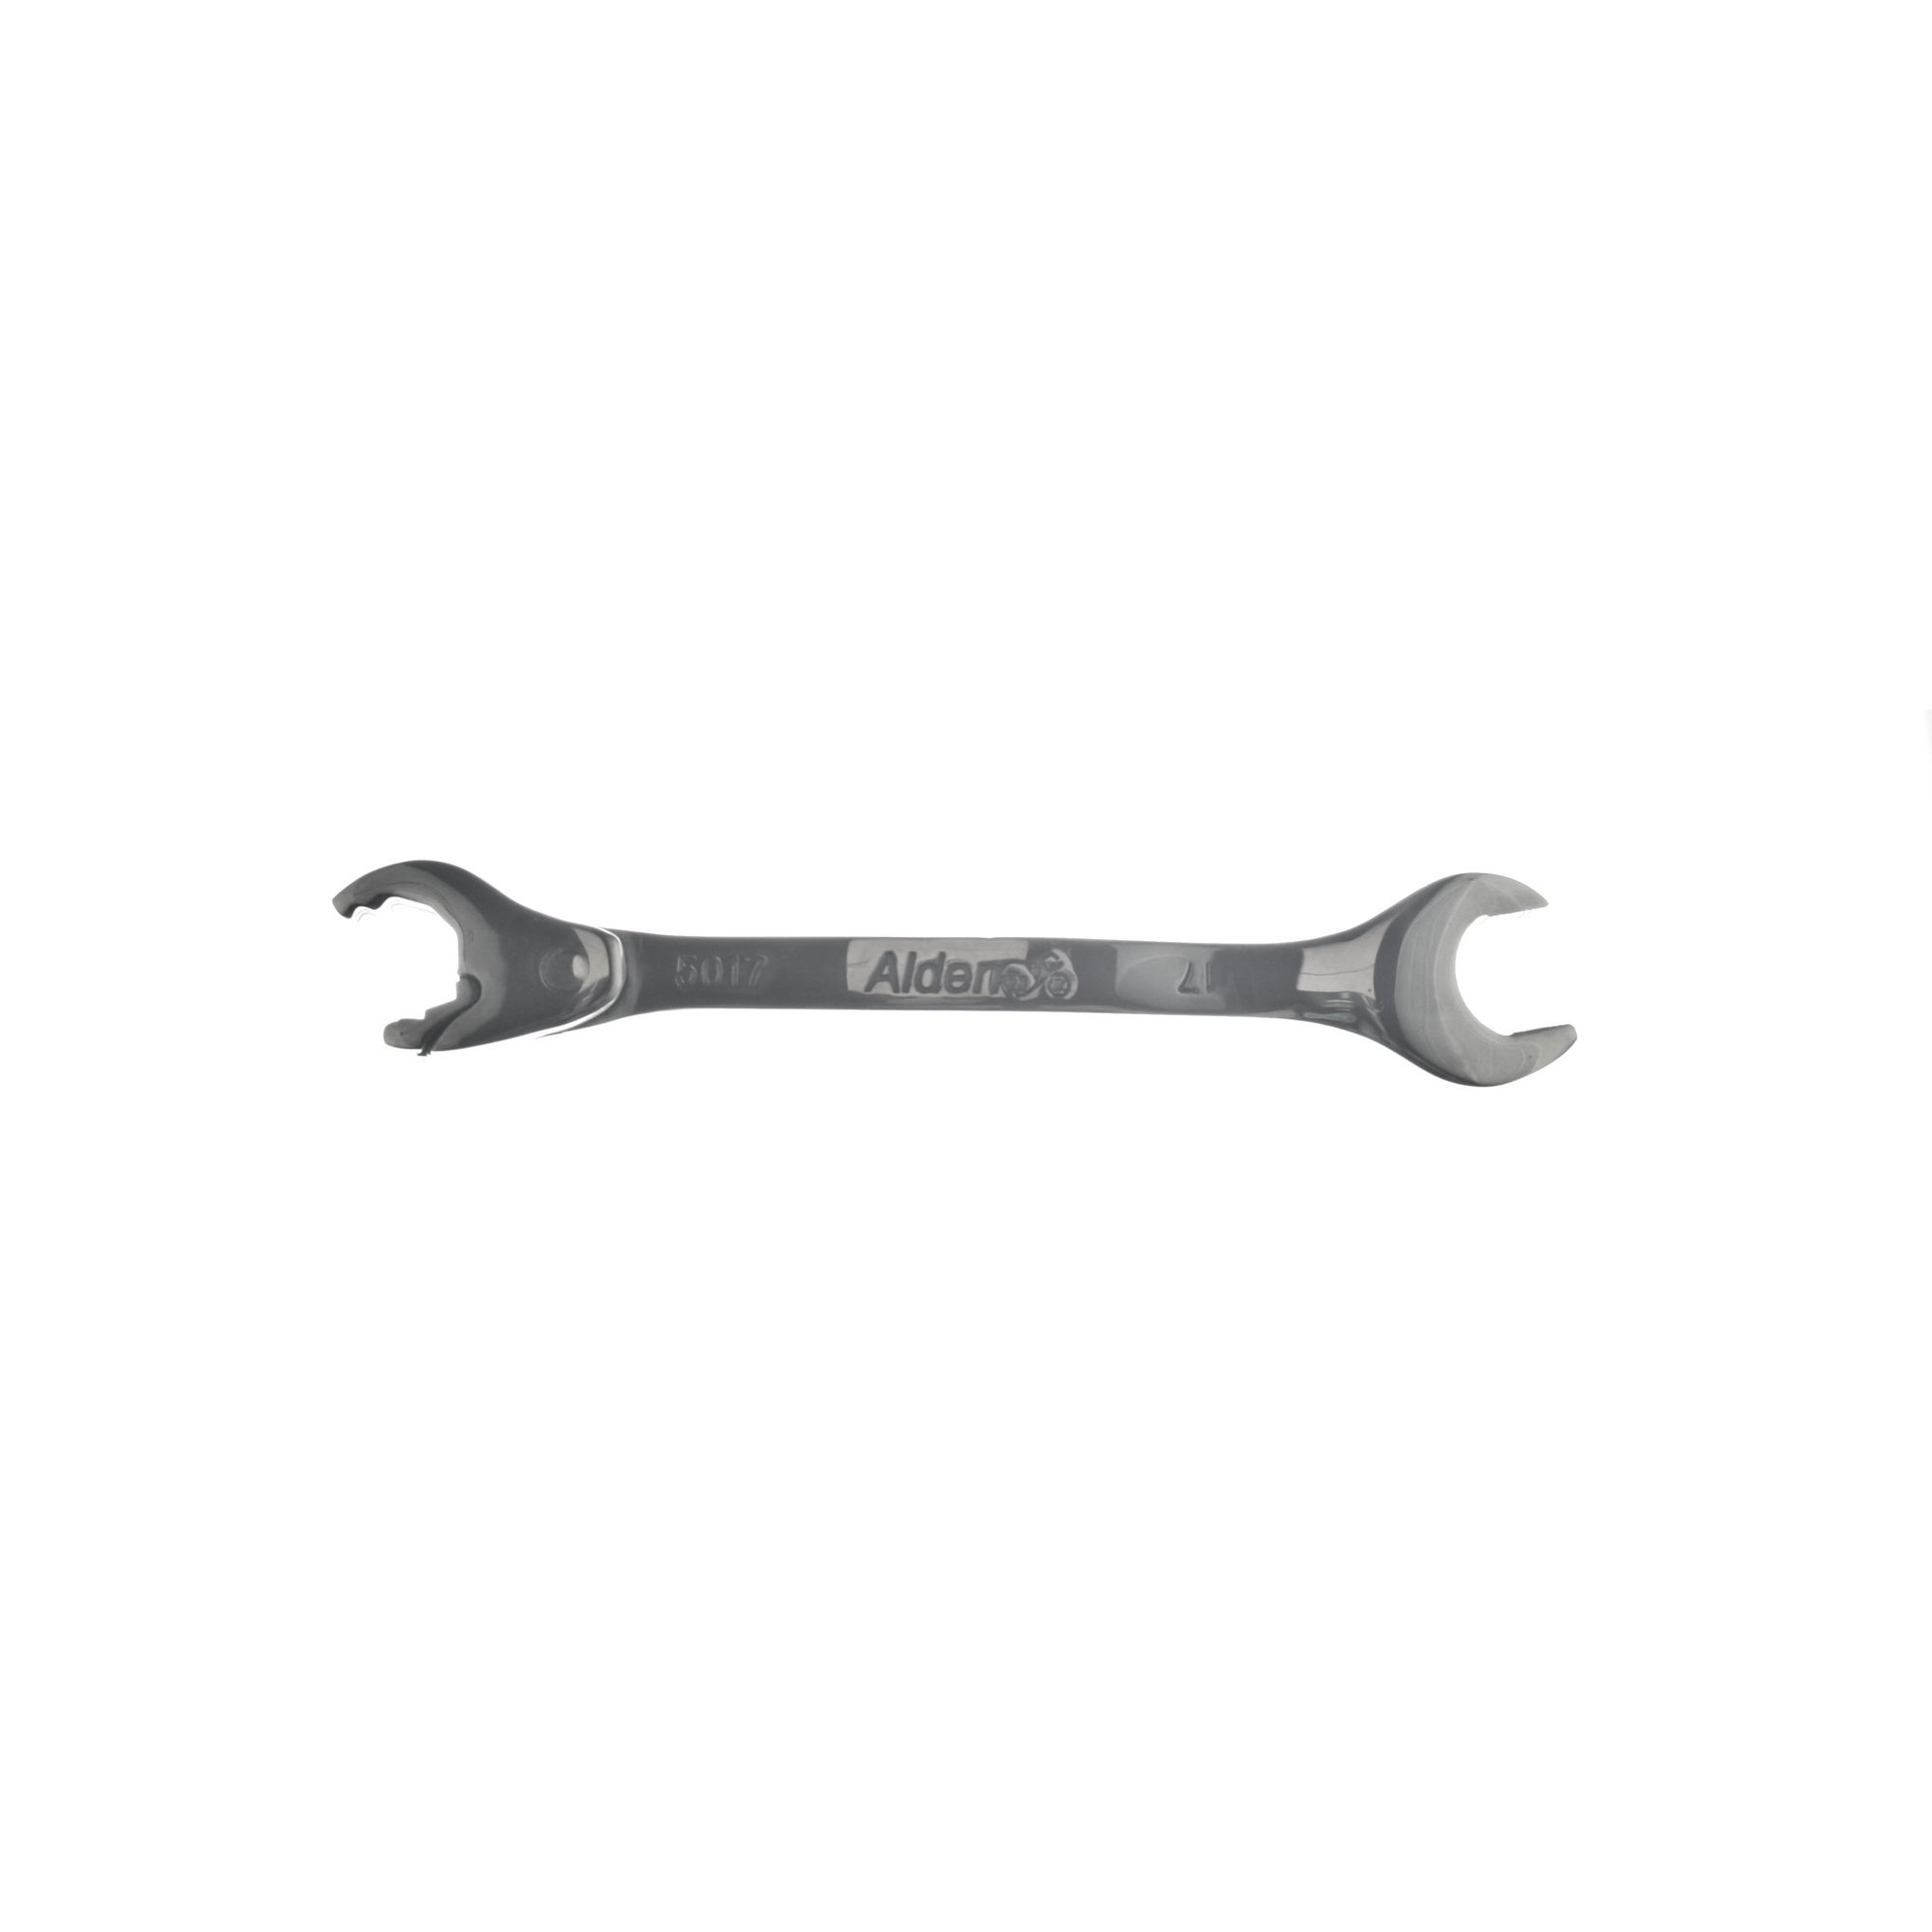 Chicago Brand 17mm Open-End Ratchet Wrench